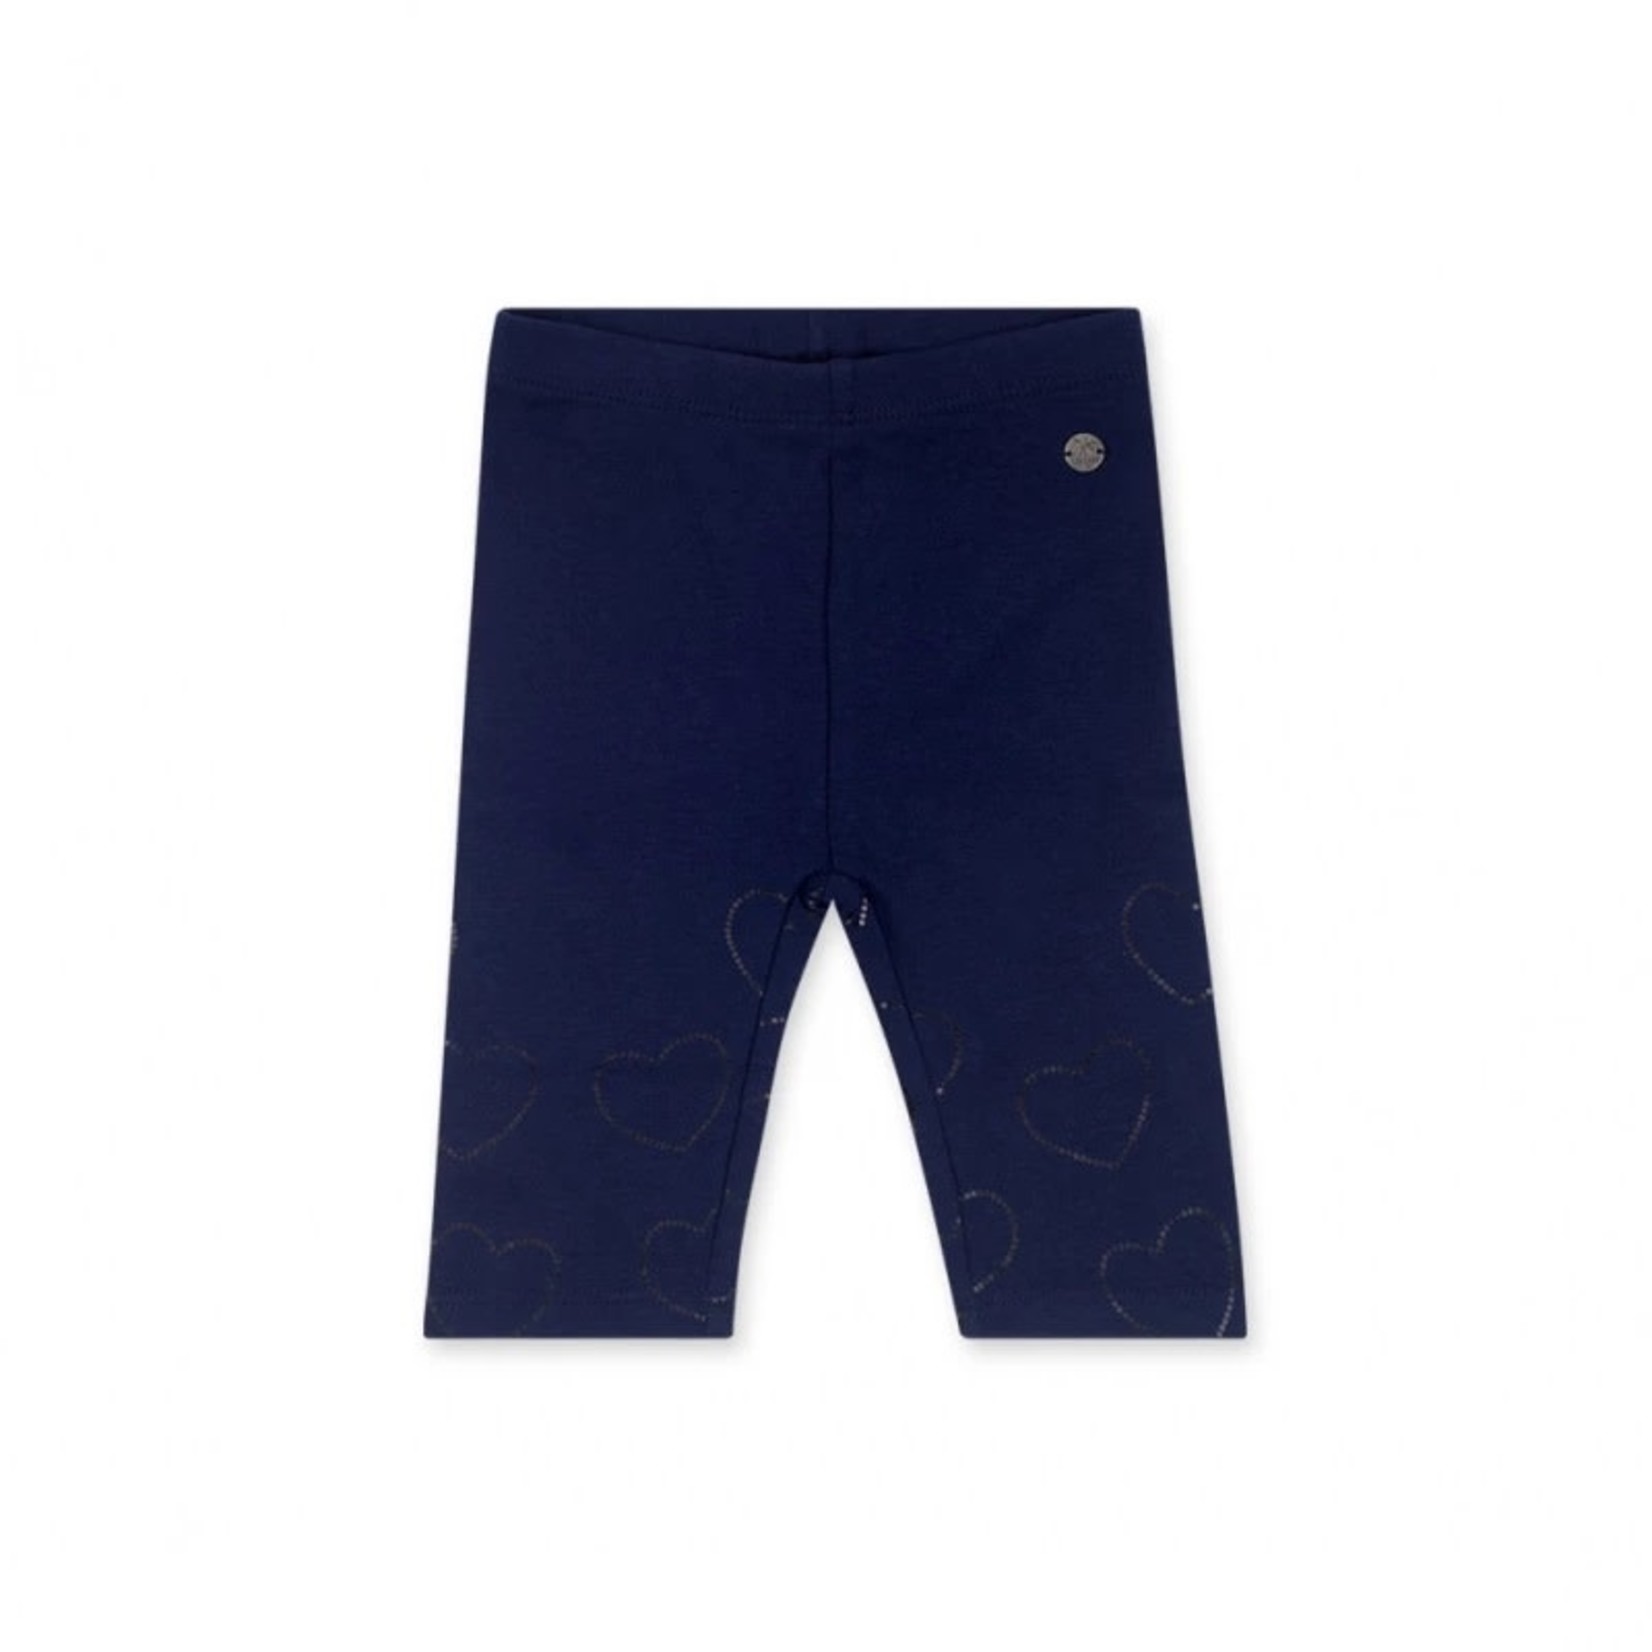 TucTuc TUC TUC - Navy Capri Leggings with Dotted Hearts Print